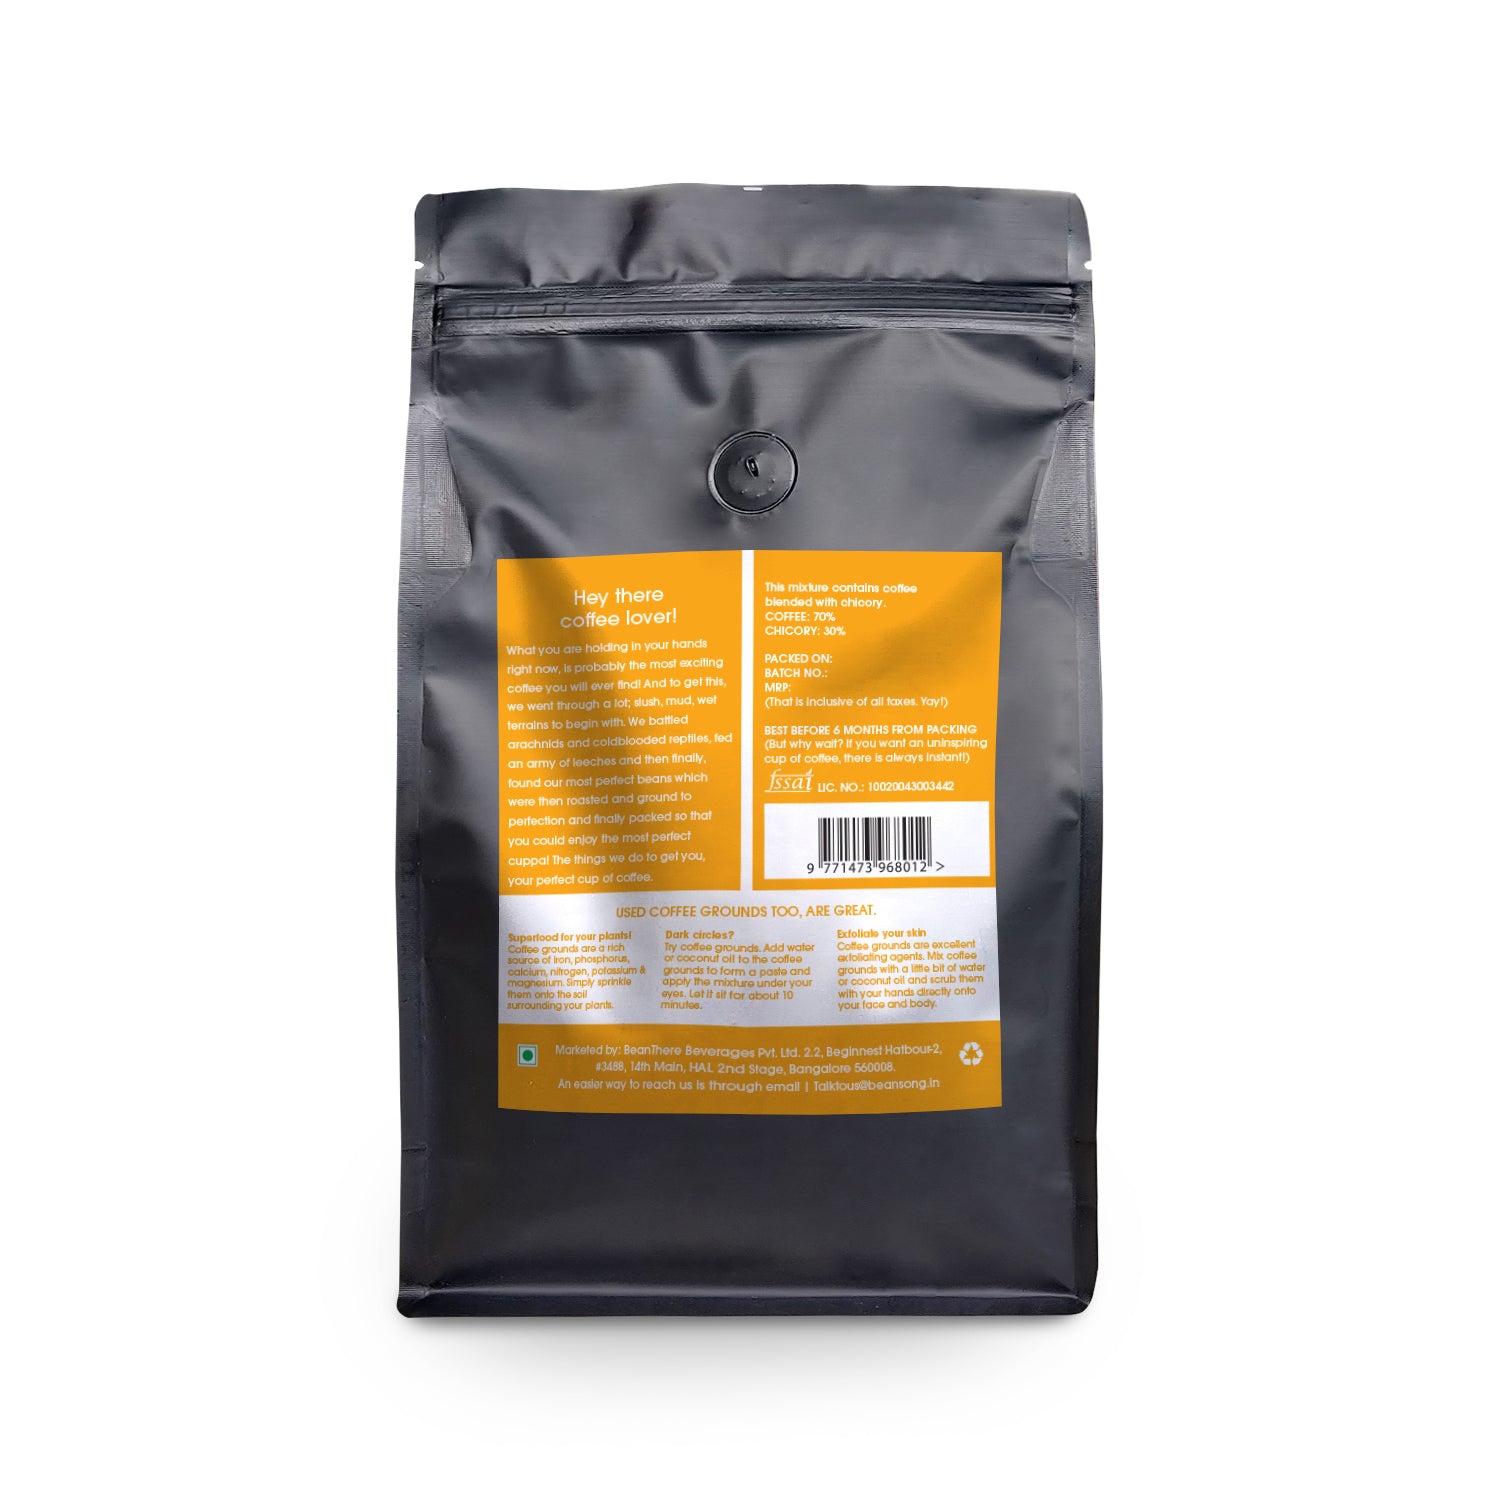 South Indian Filter Coffee with Chicory - Powder(250g)